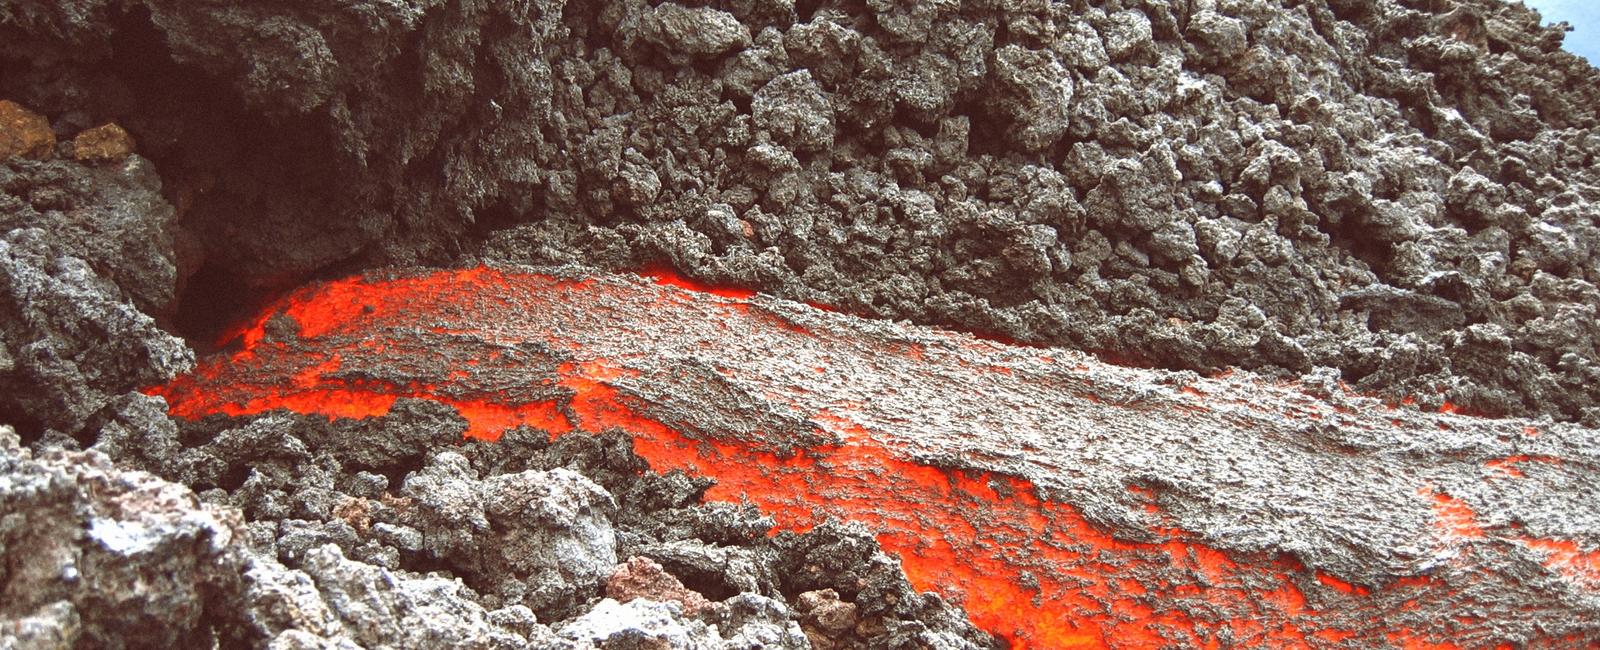 Magma is the hot liquid rock under the surface of the earth it is known as lava after it comes out of a volcano